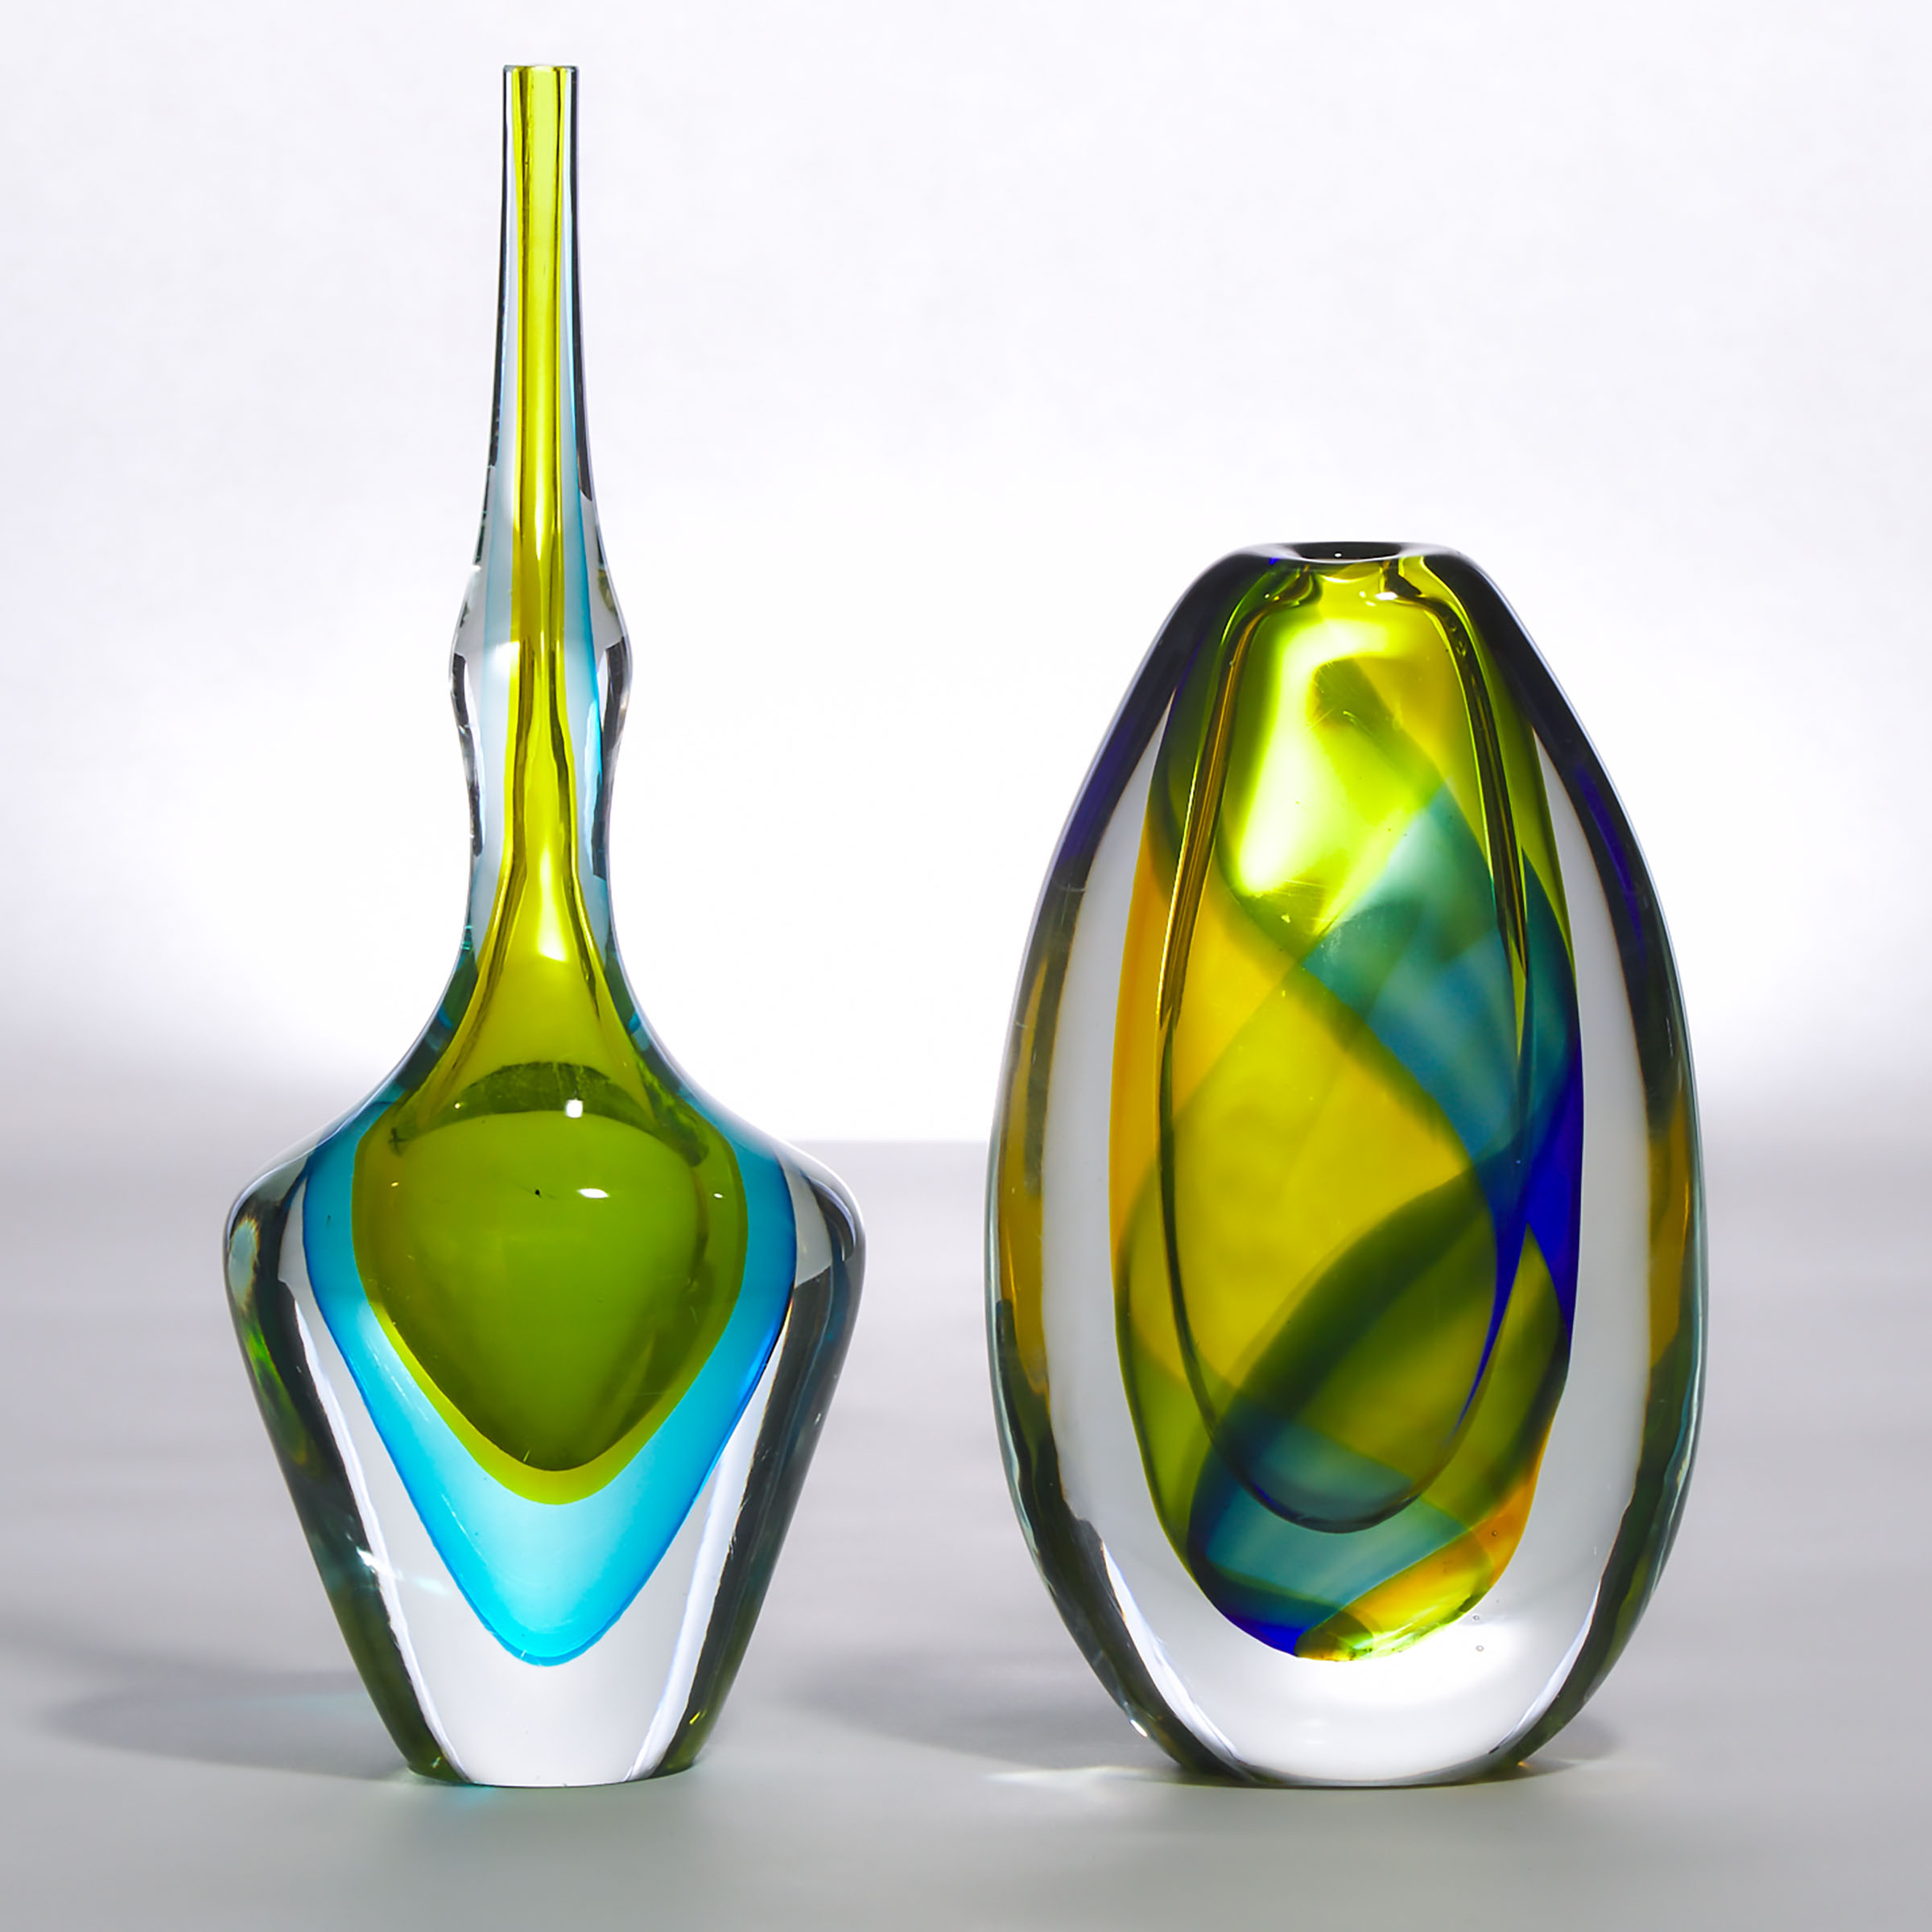 Two Citron and Blue Sommerso Glass Vases, probably Murano, mid-20th century